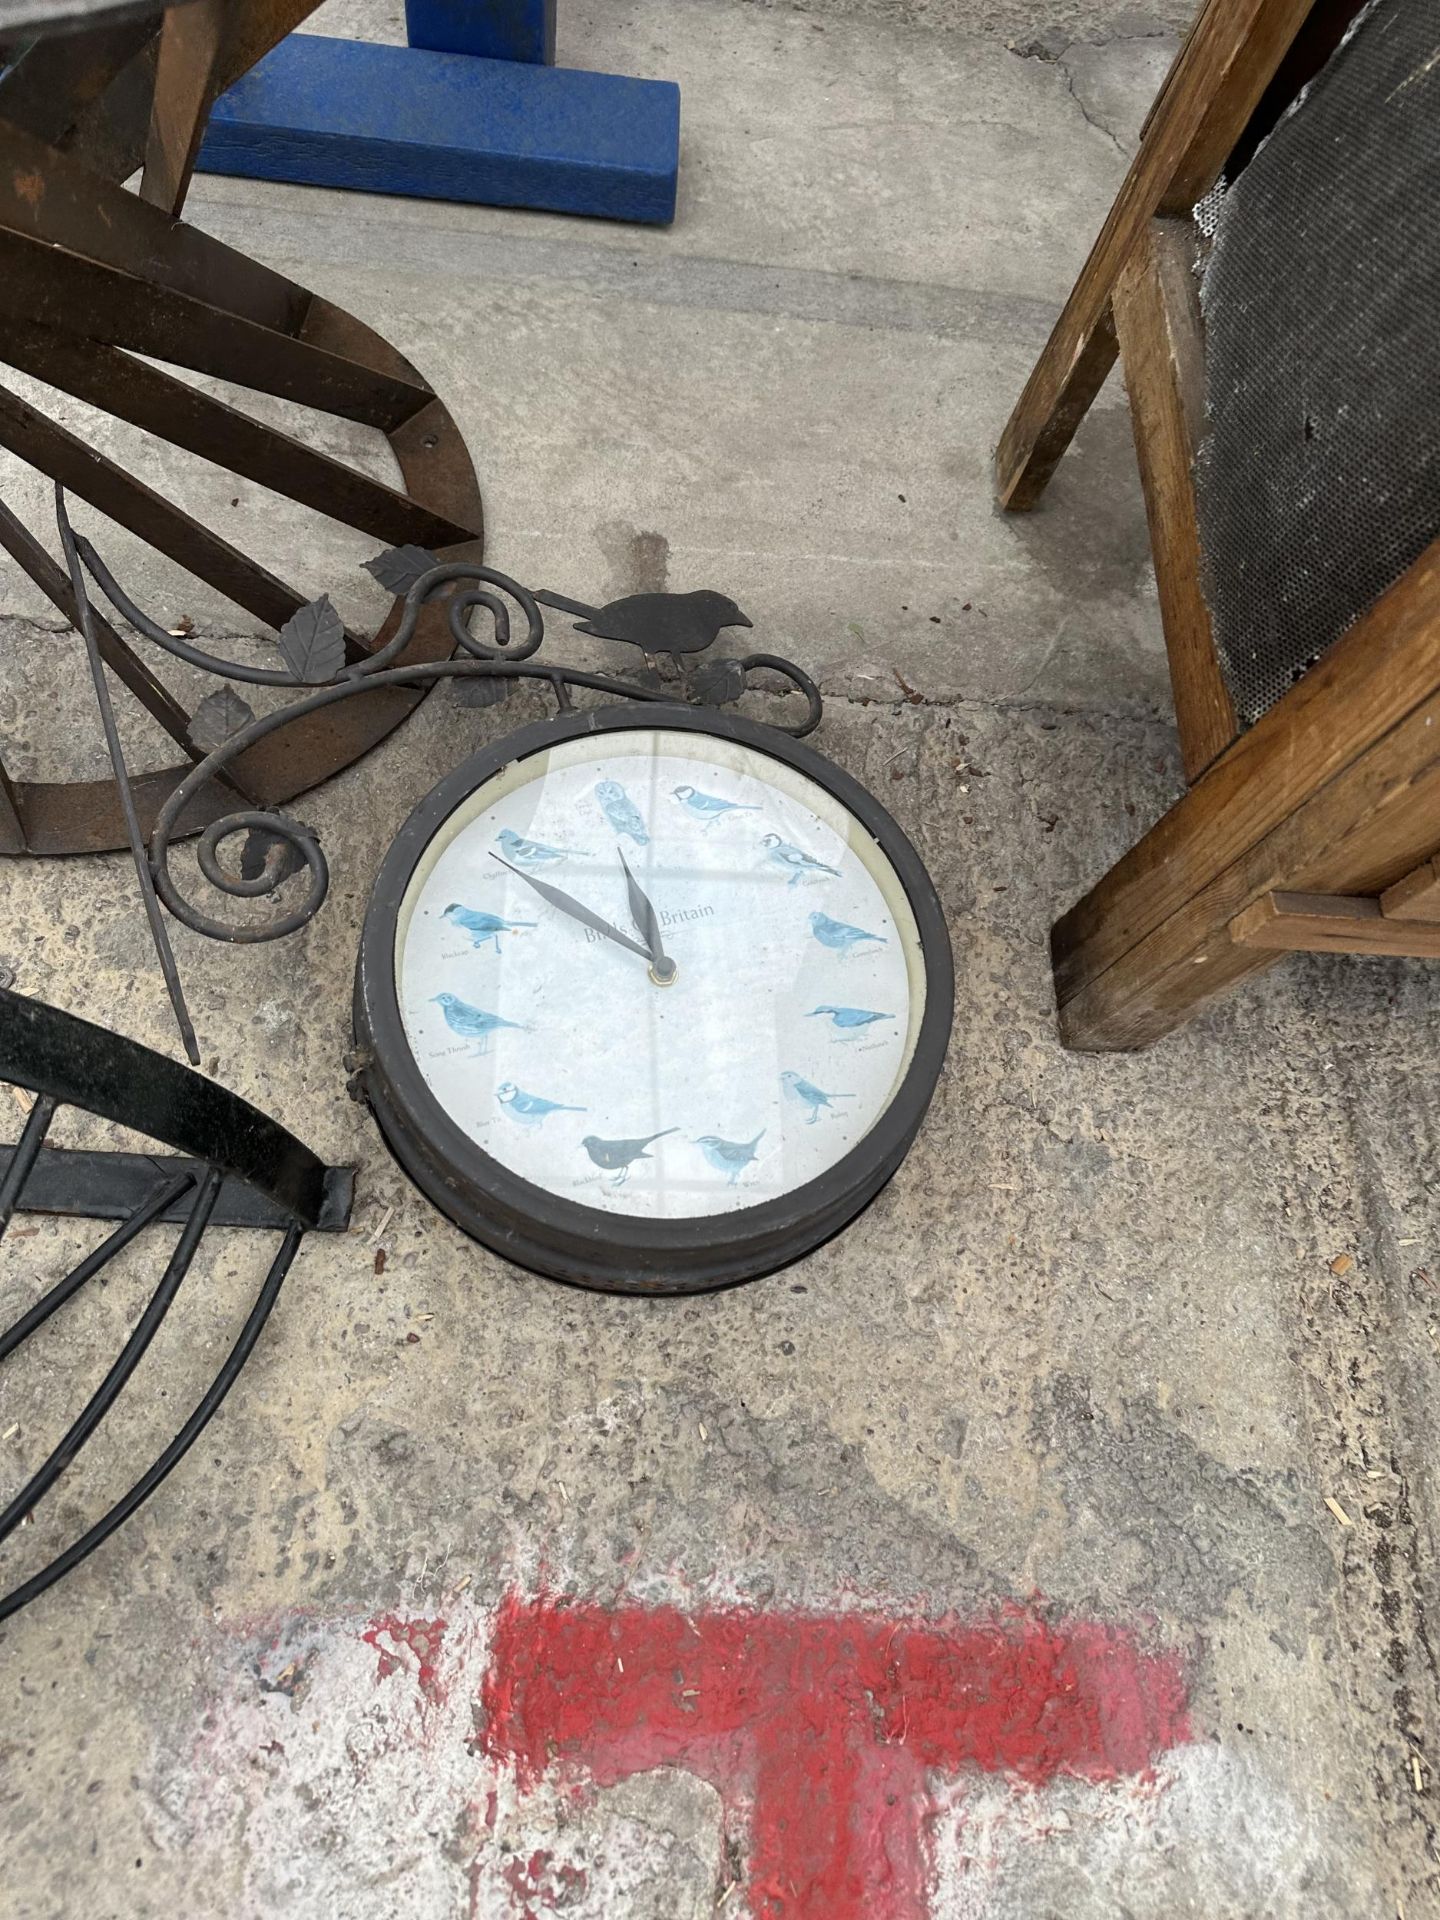 AN OUTDOOR CLOCK, A HAYRACK PLANTER AND A FURTHER METAL TABLE BASE - Image 2 of 4